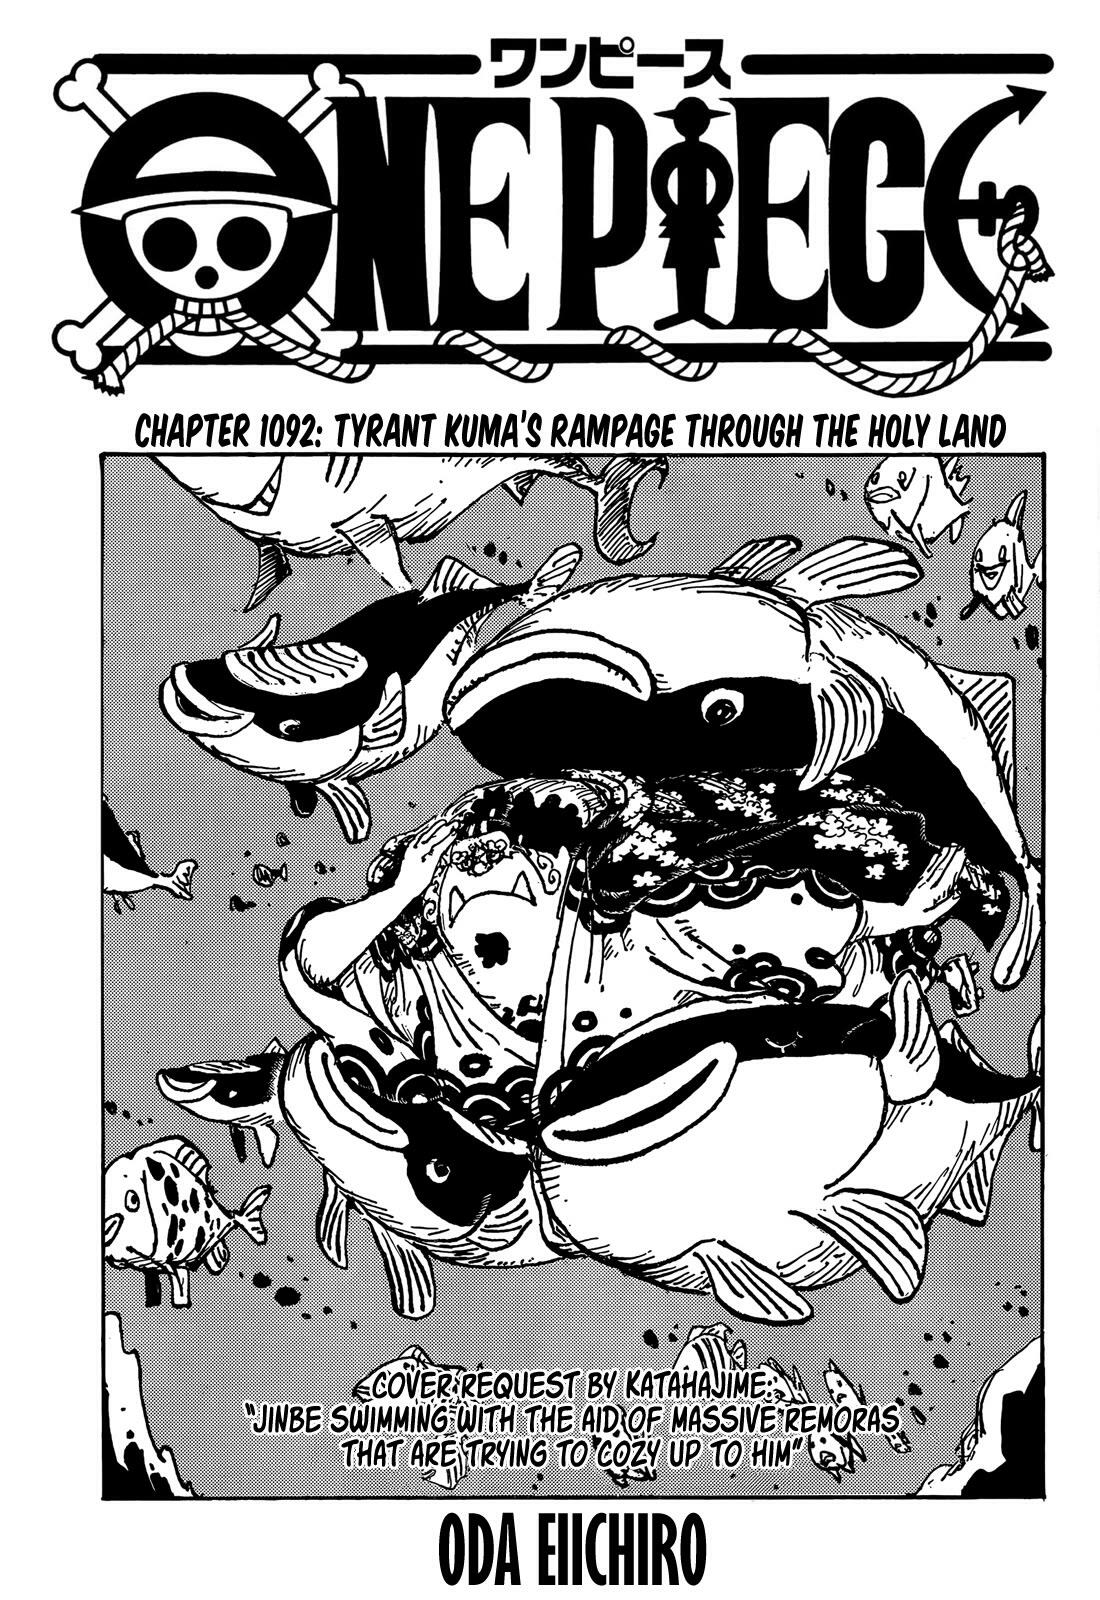 One Piece Chapter 1058 New Emperor, Page 7